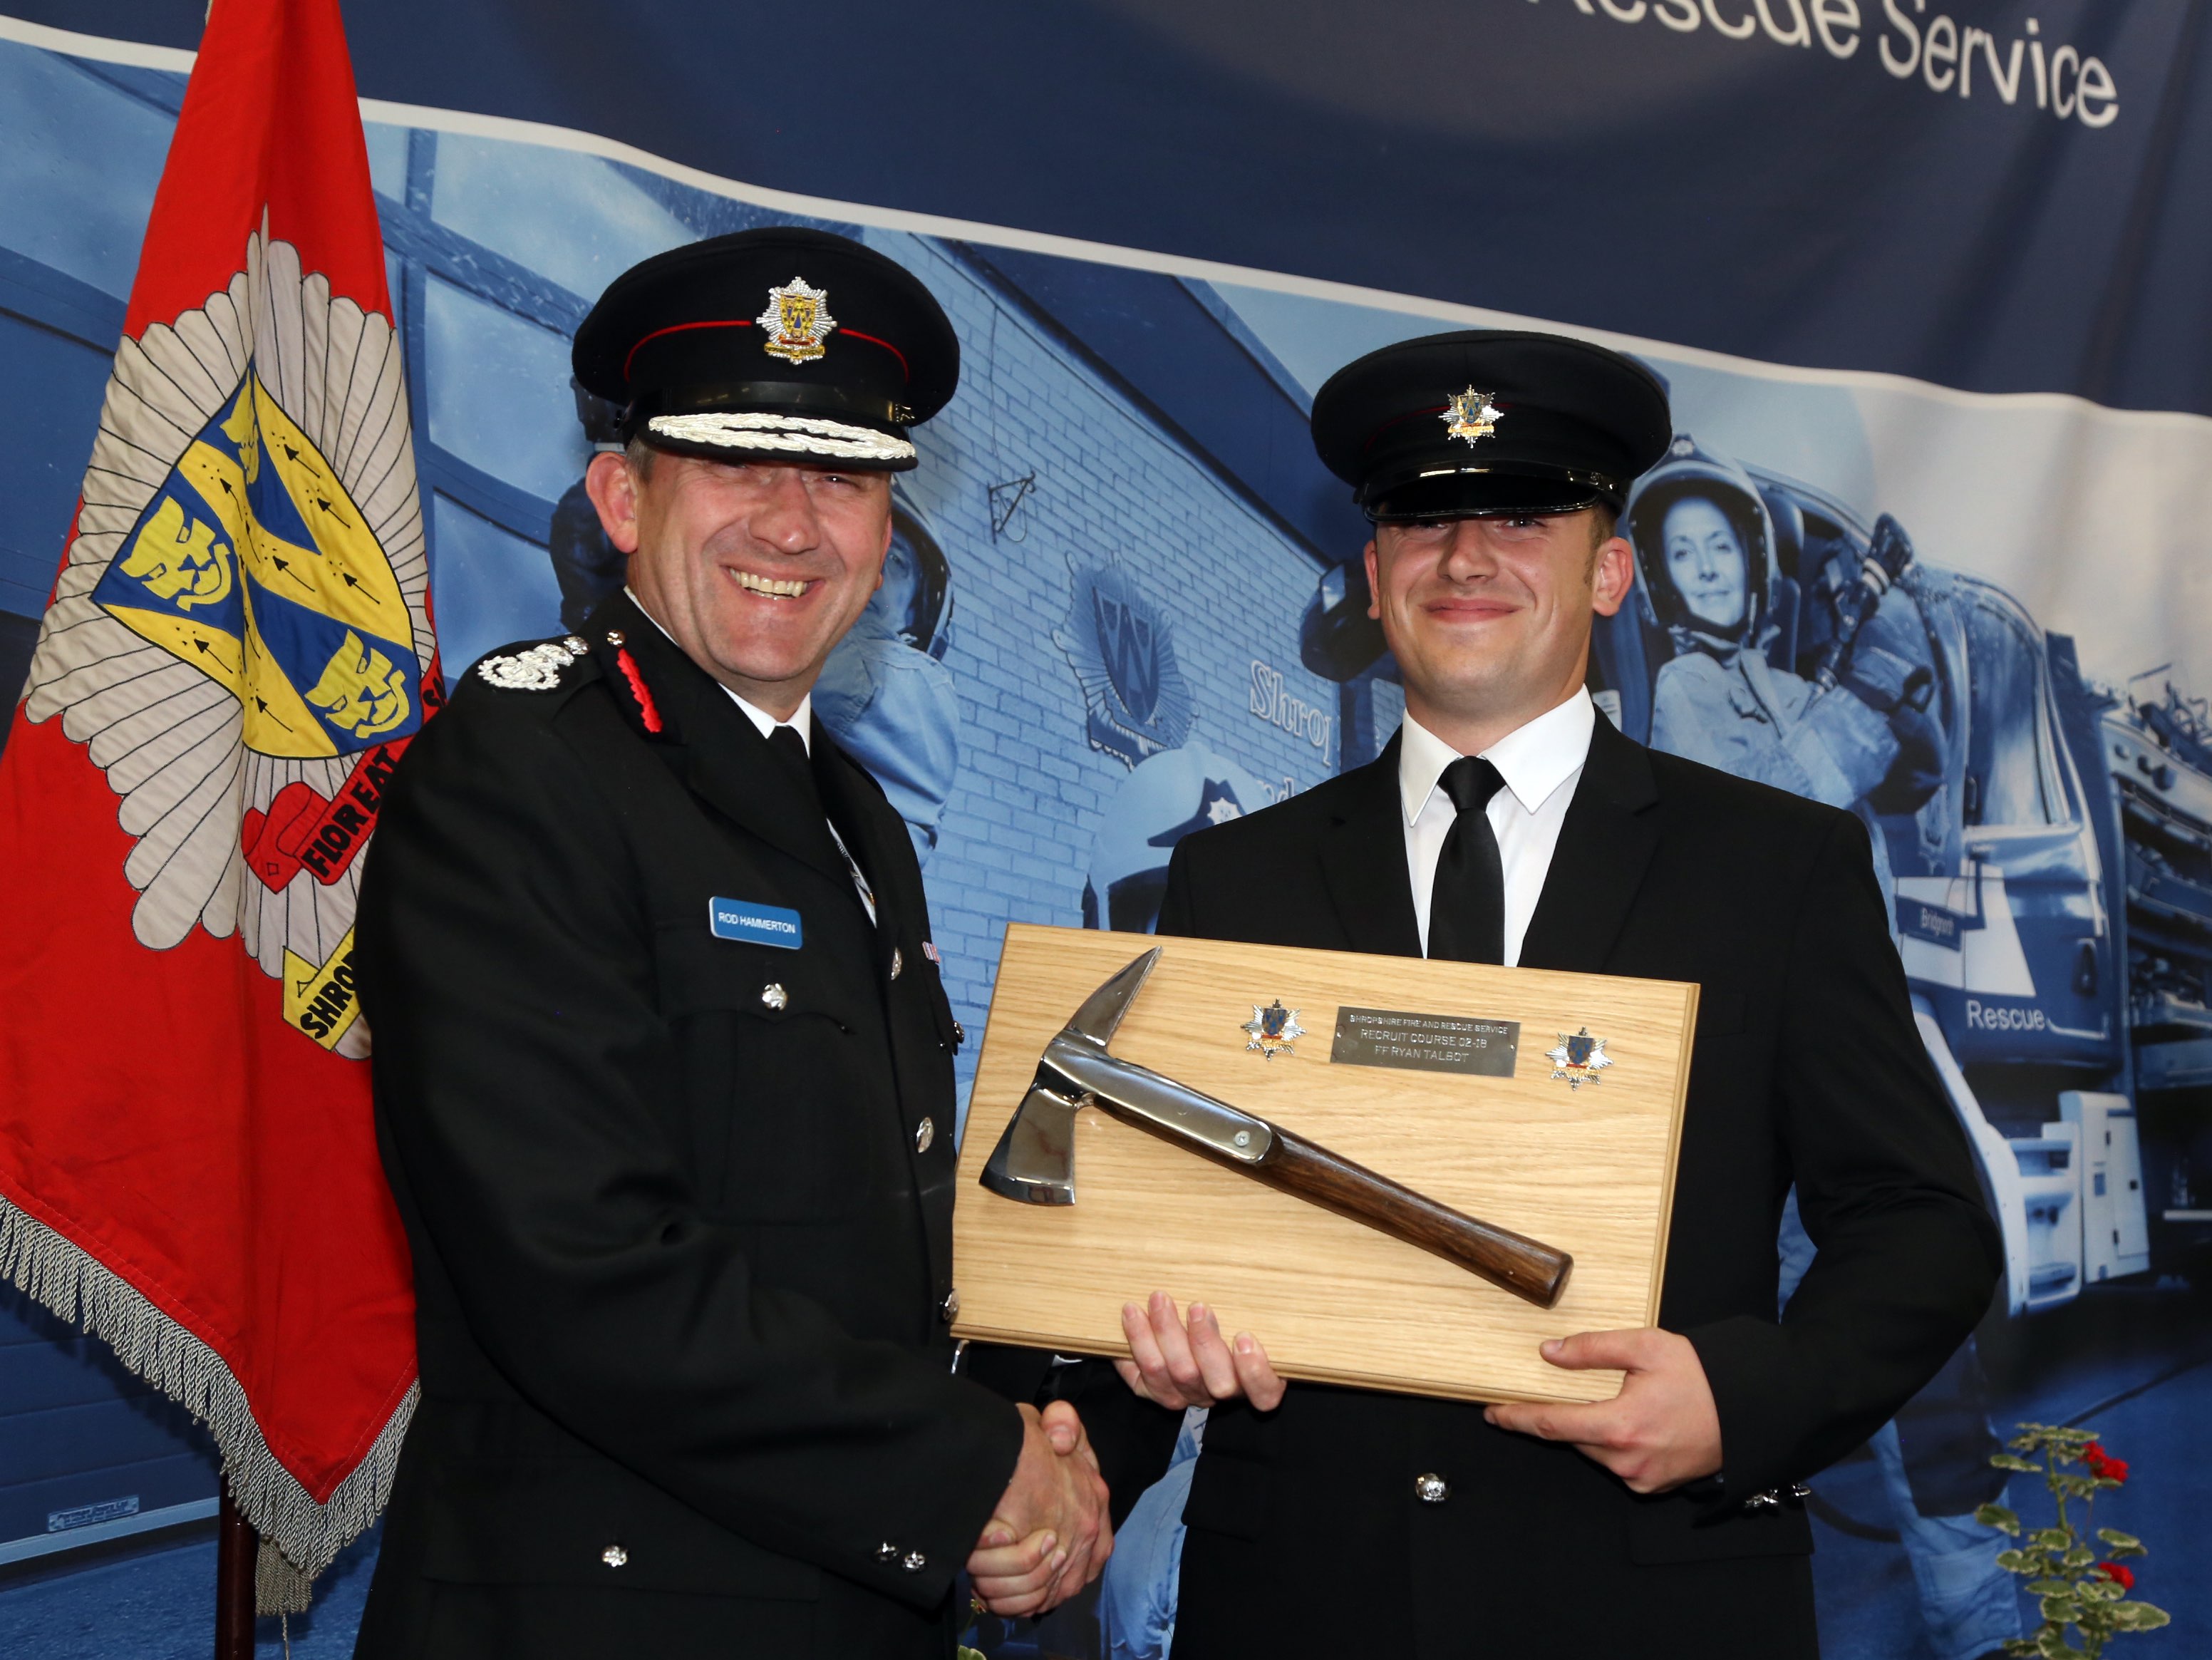 Telford firefighter Ryan Talbot receives the Silver Axe award for top student from Chief Fire Officer Rod Hammerton